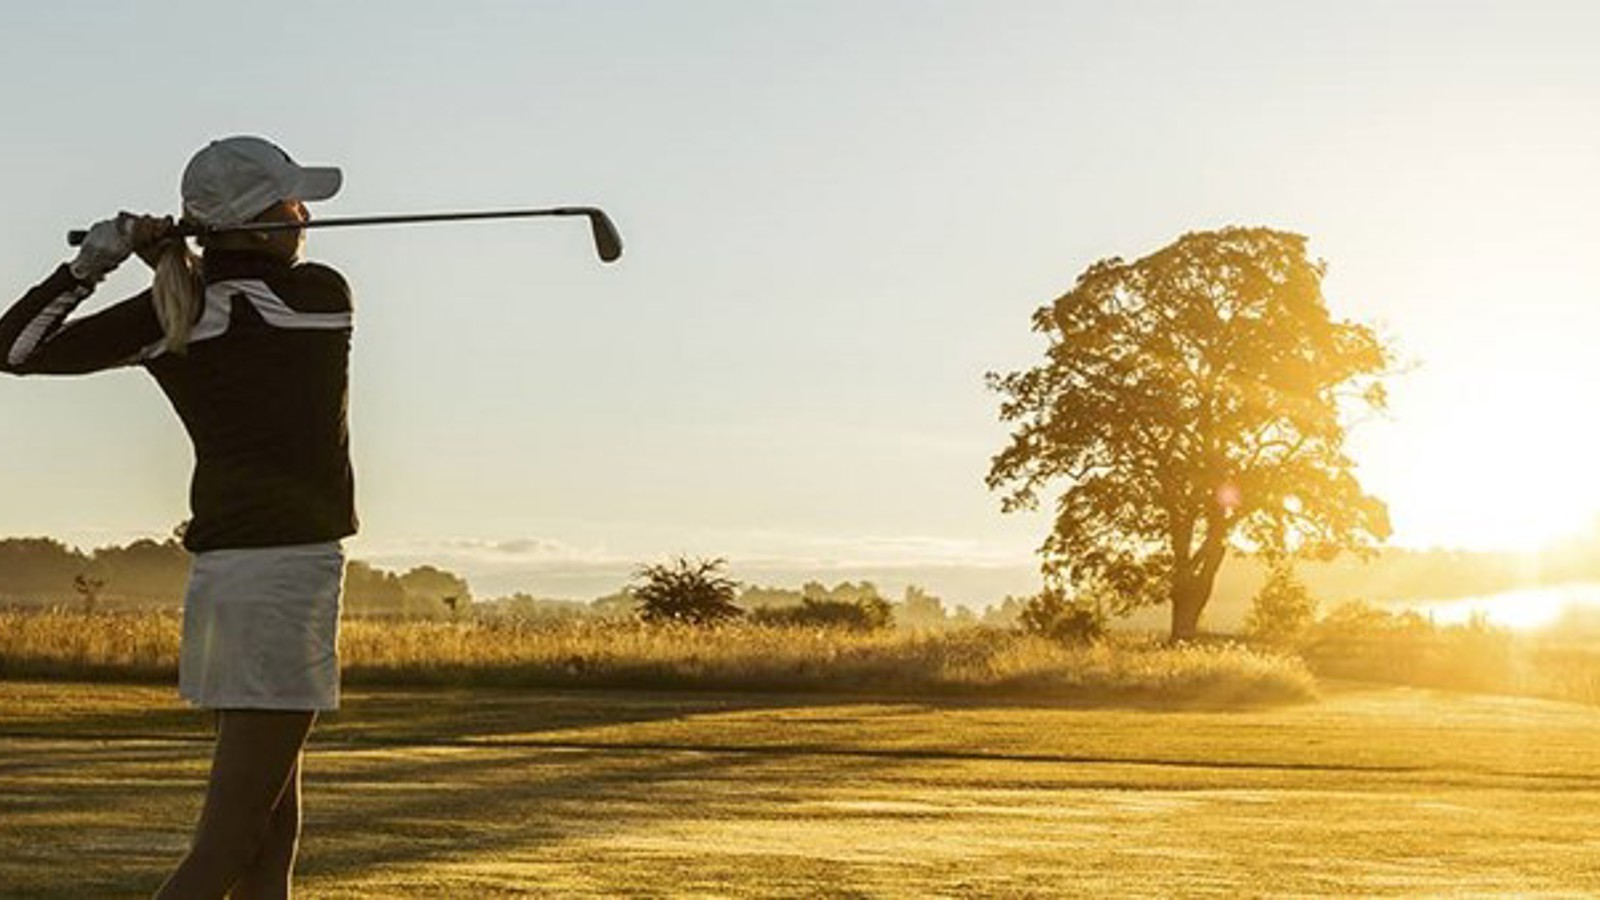 Golfer on a golf course in sunset